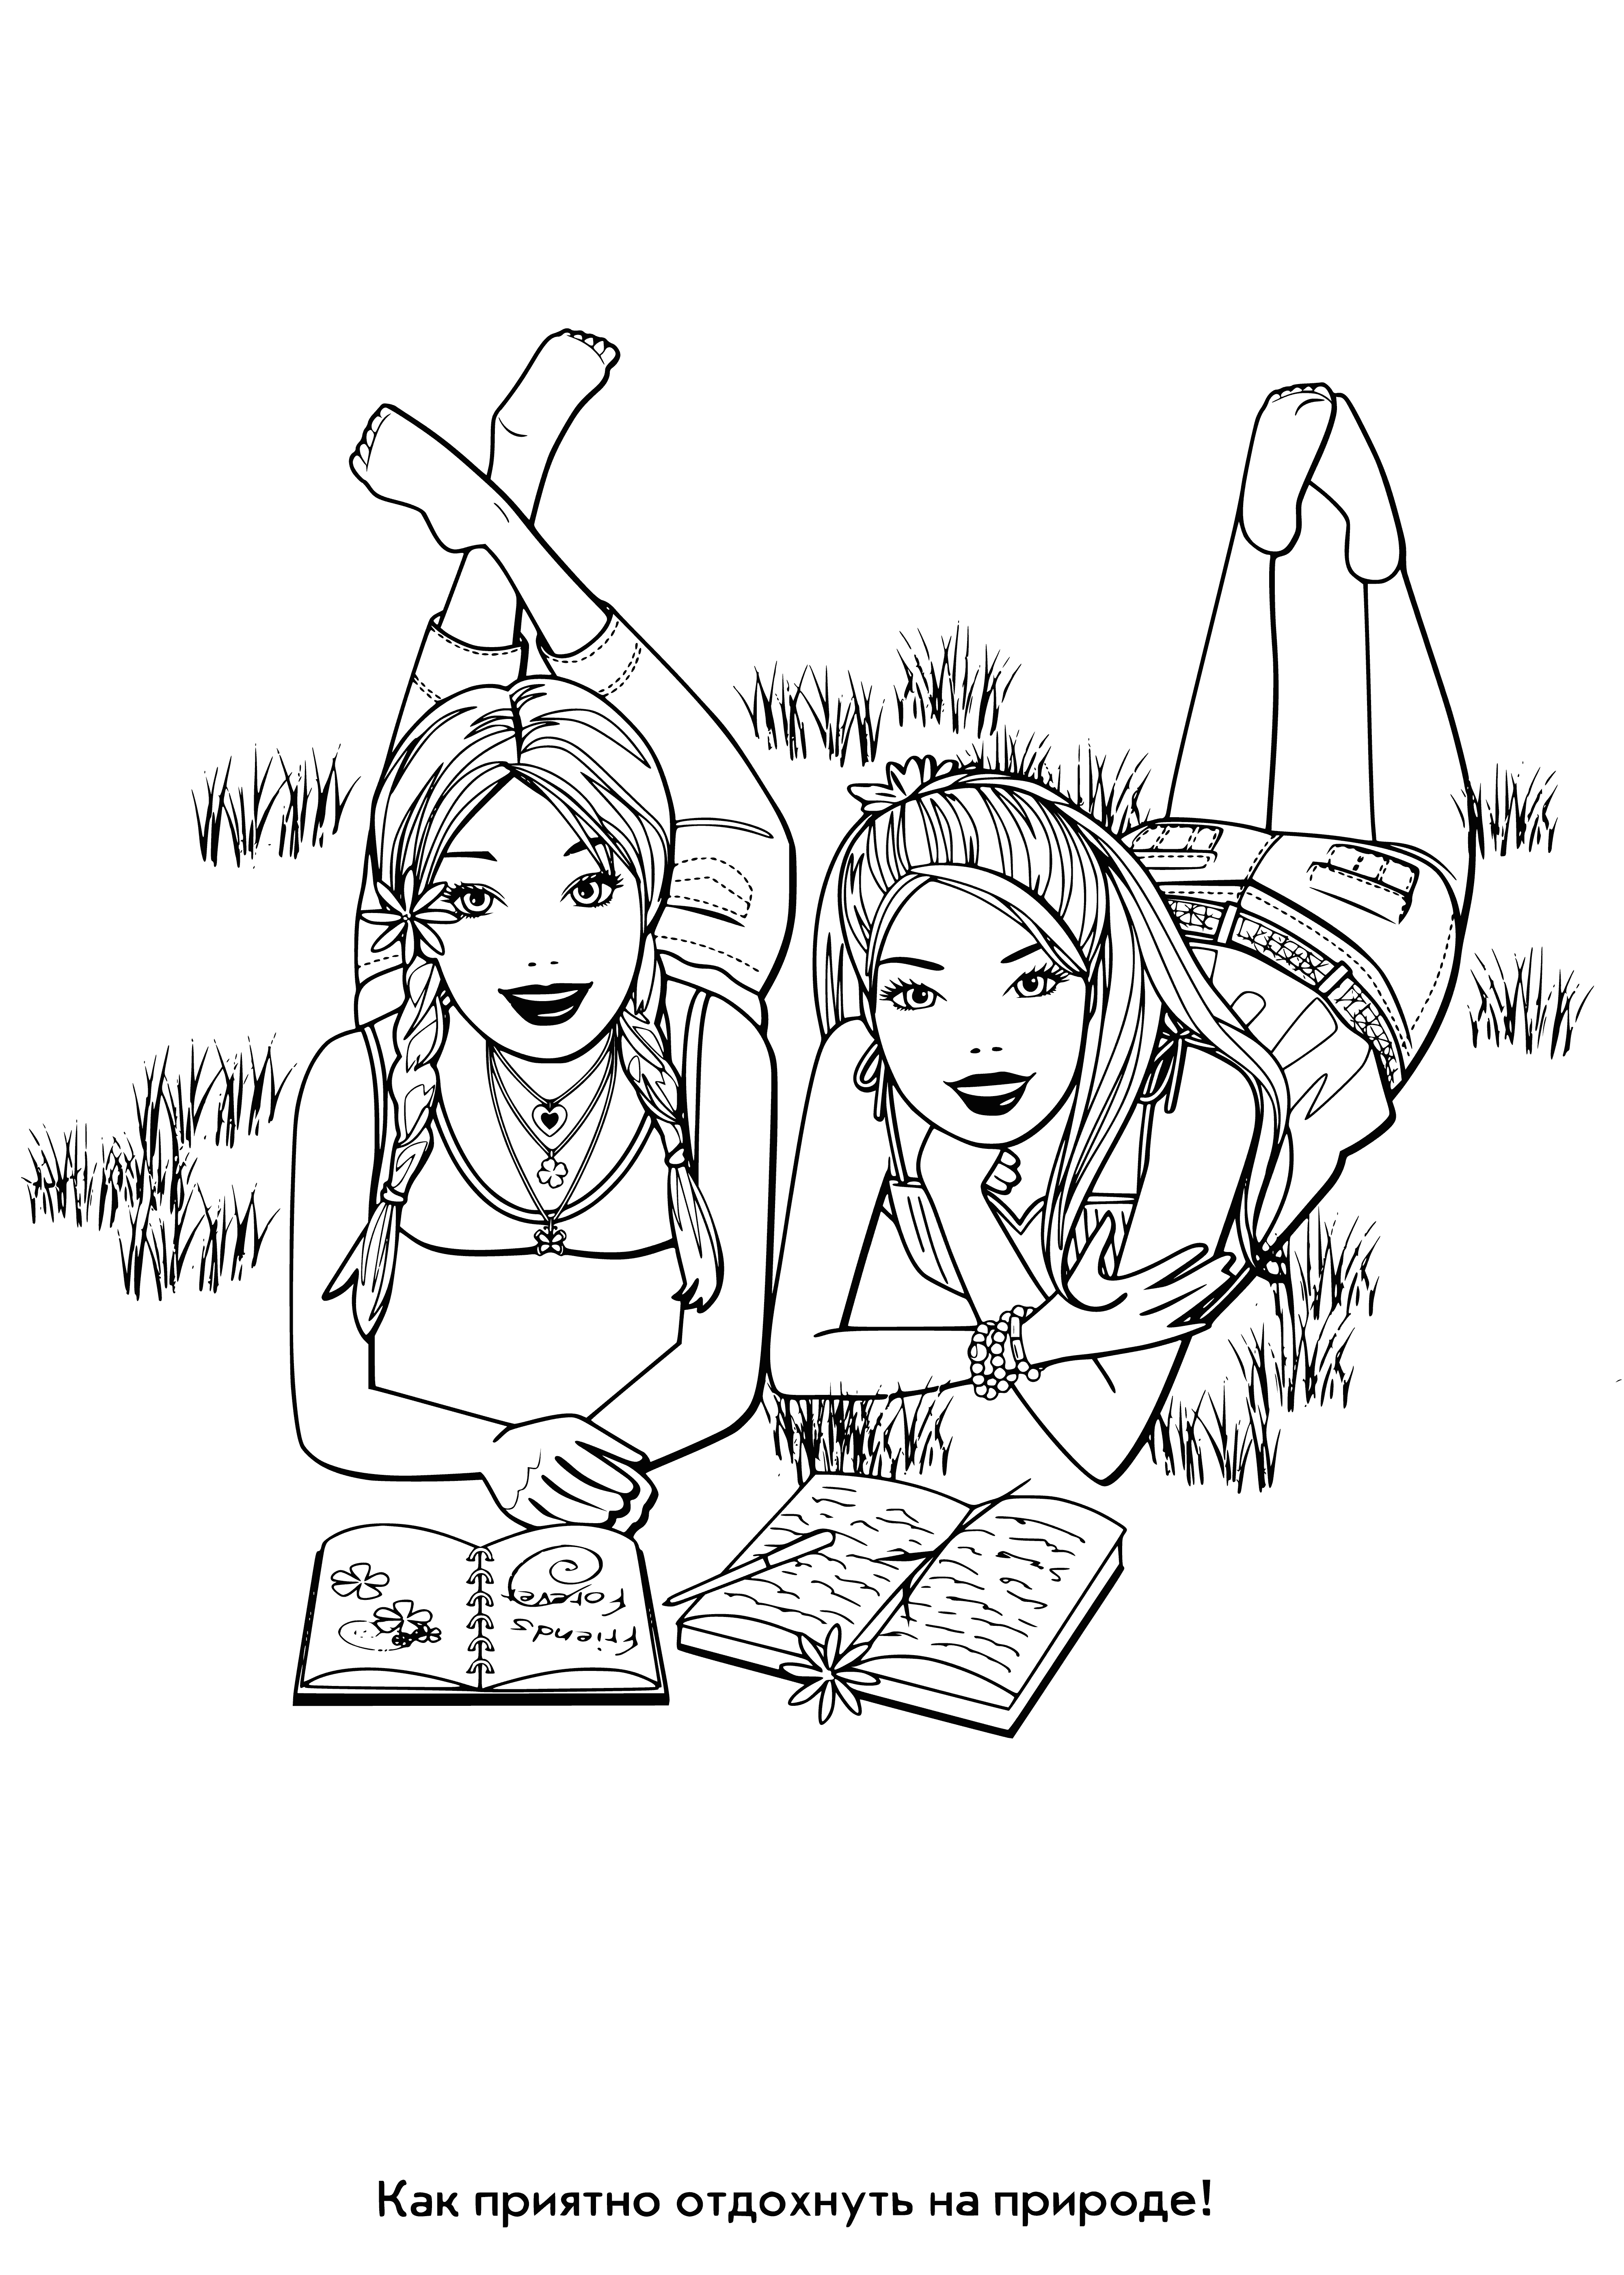 coloring page: Barbie is enjoying nature's beauty with clear blue skies, trees, flowers, and a river. #outdoors #relaxation